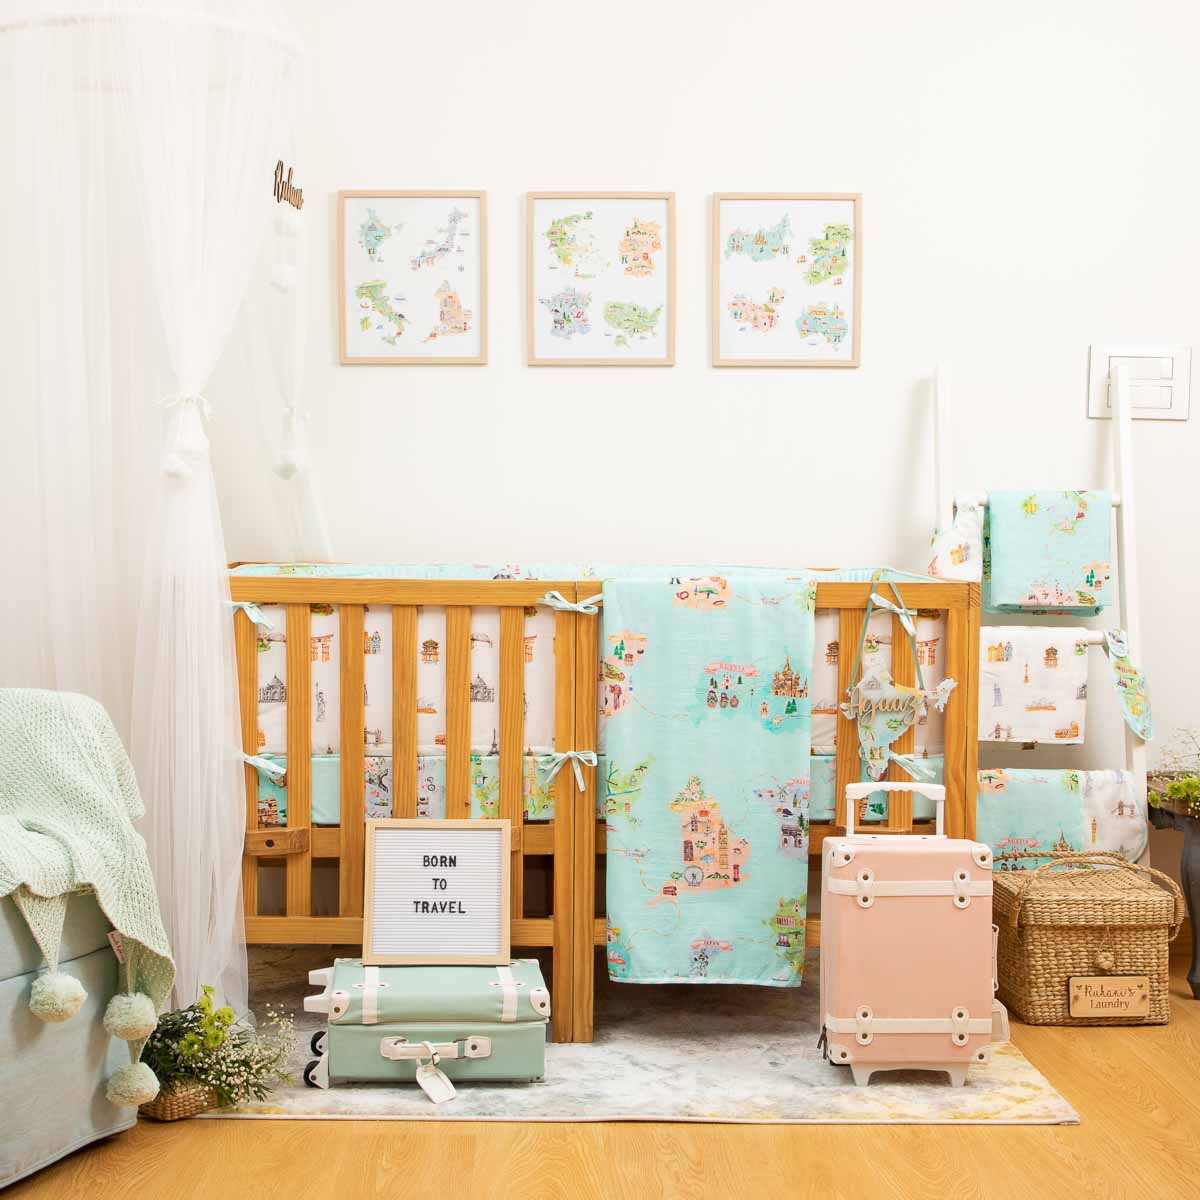 Born To Travel - Cot Bedding Set With / Without Bumper